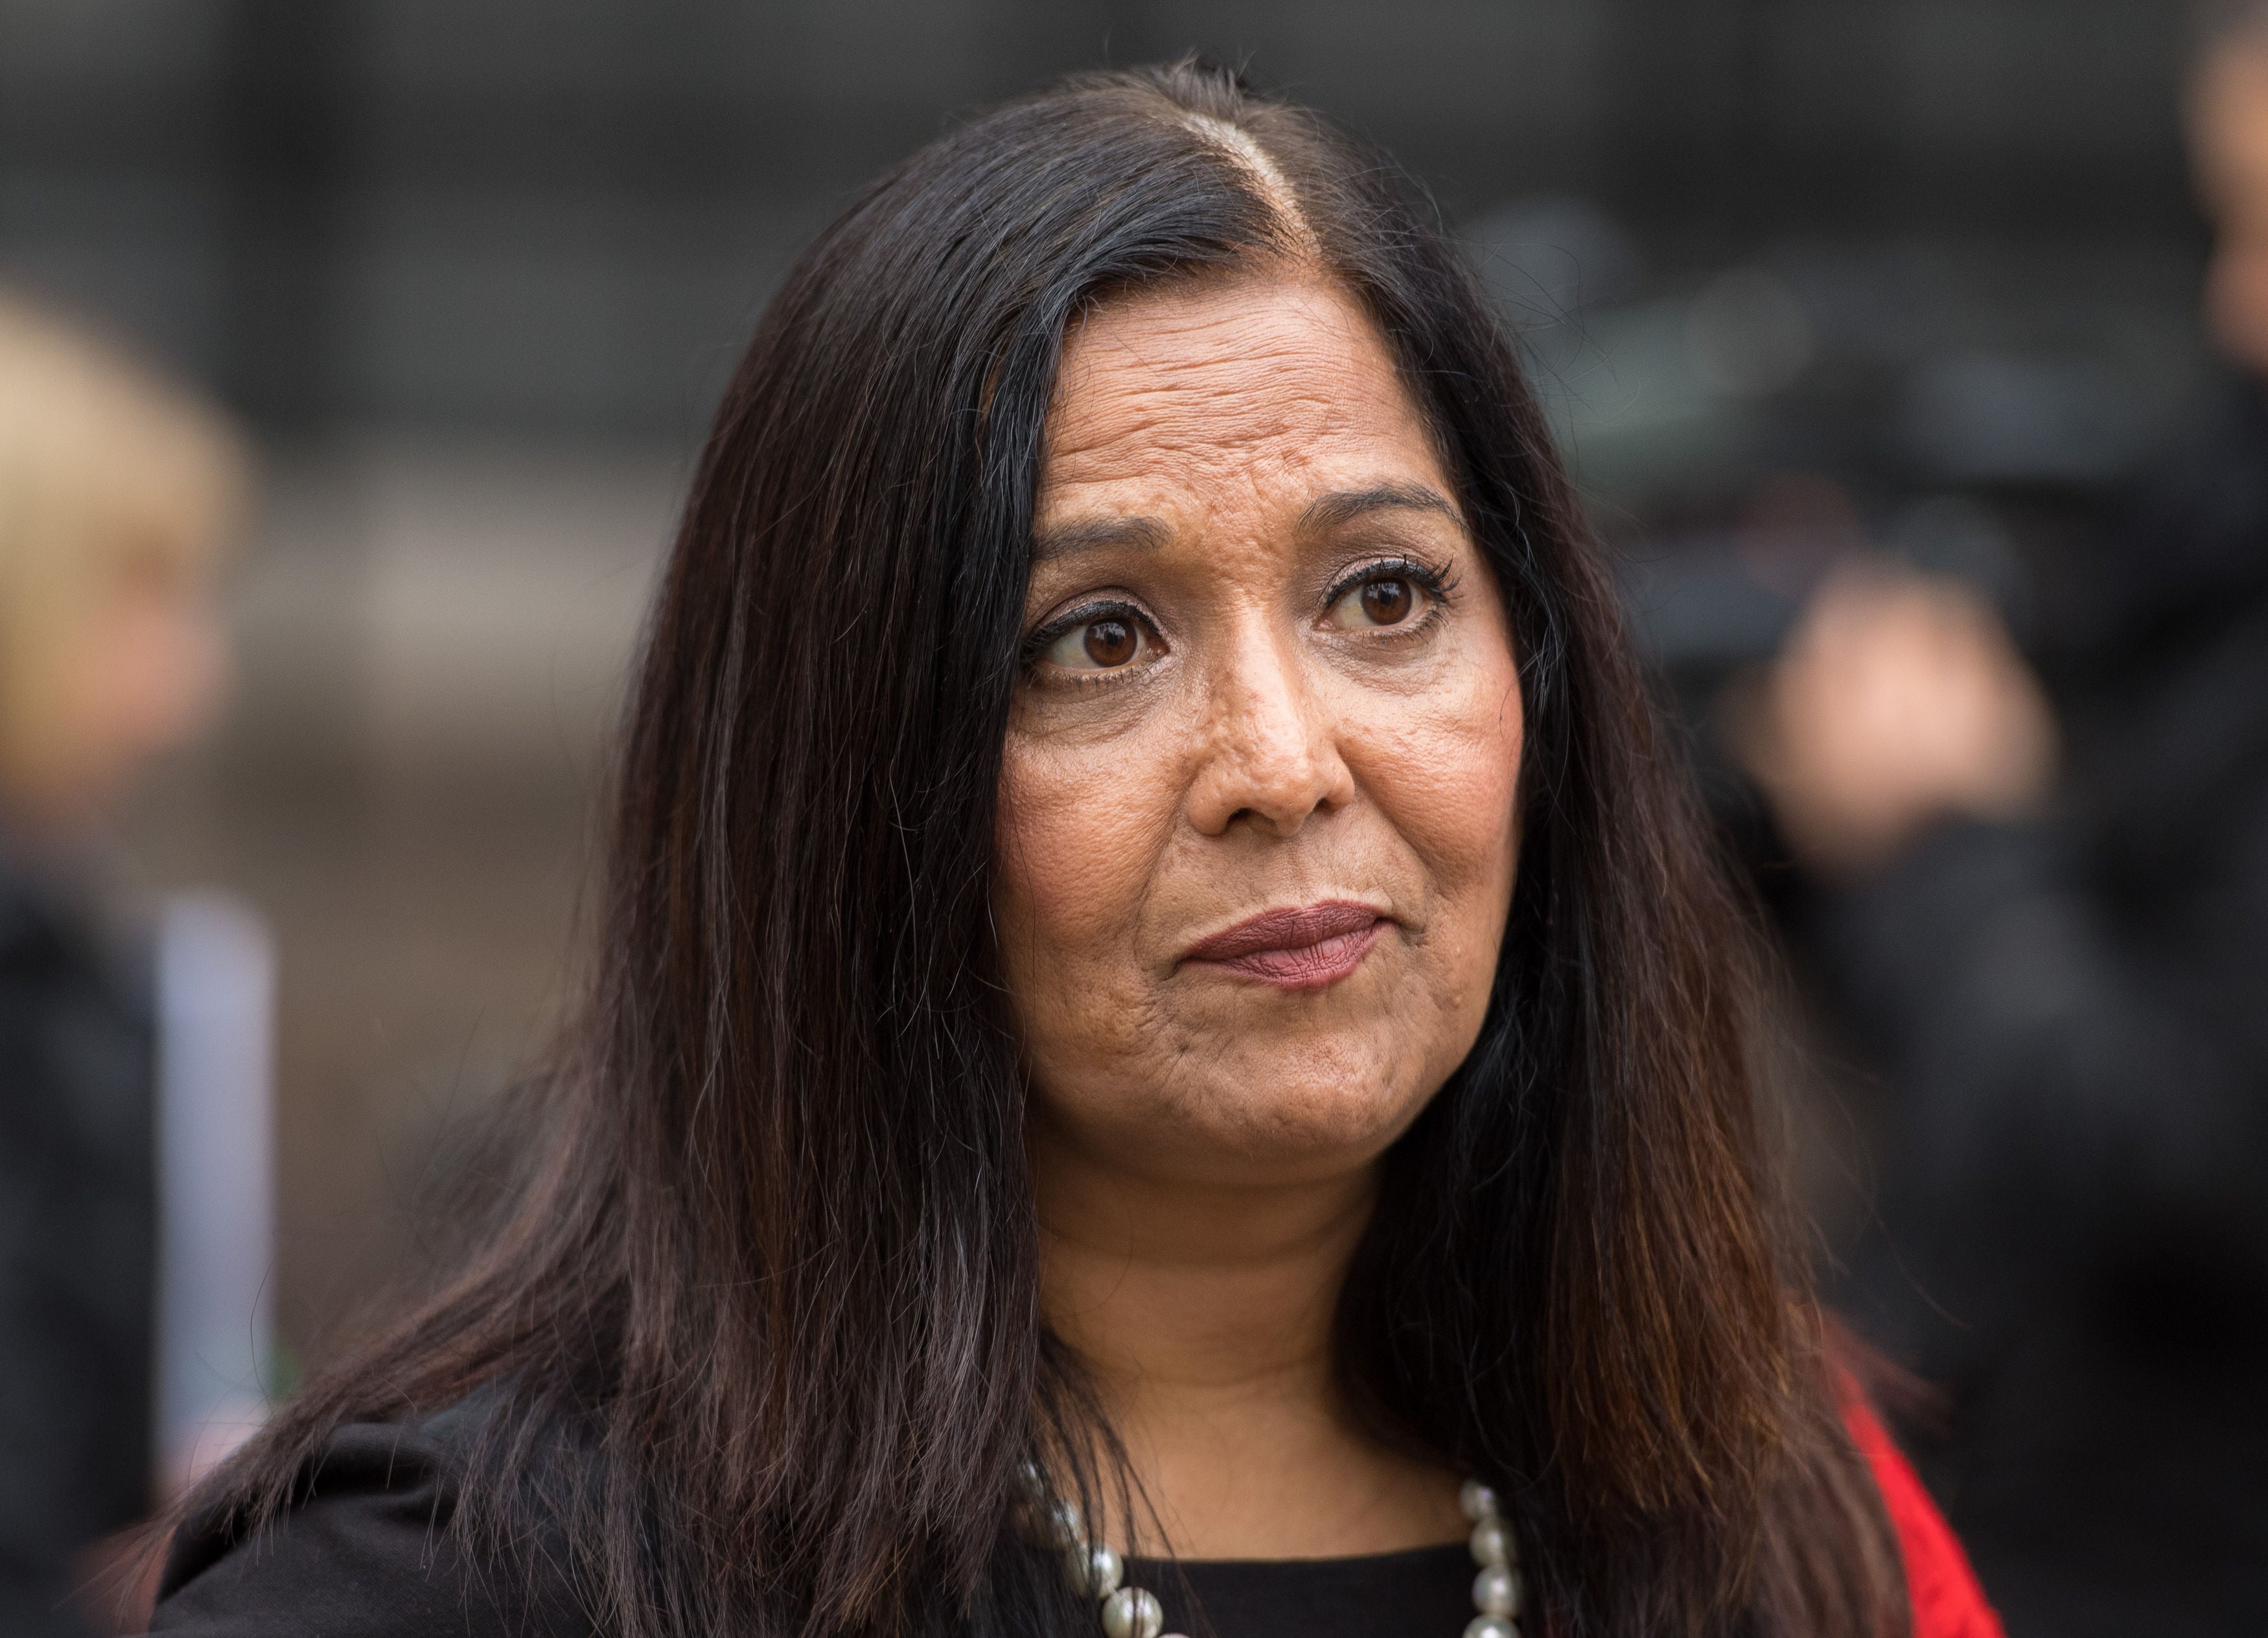 Yasmin Qureshi MP says ‘we must call for an end to the carnage to protect innocent lives and end human suffering’